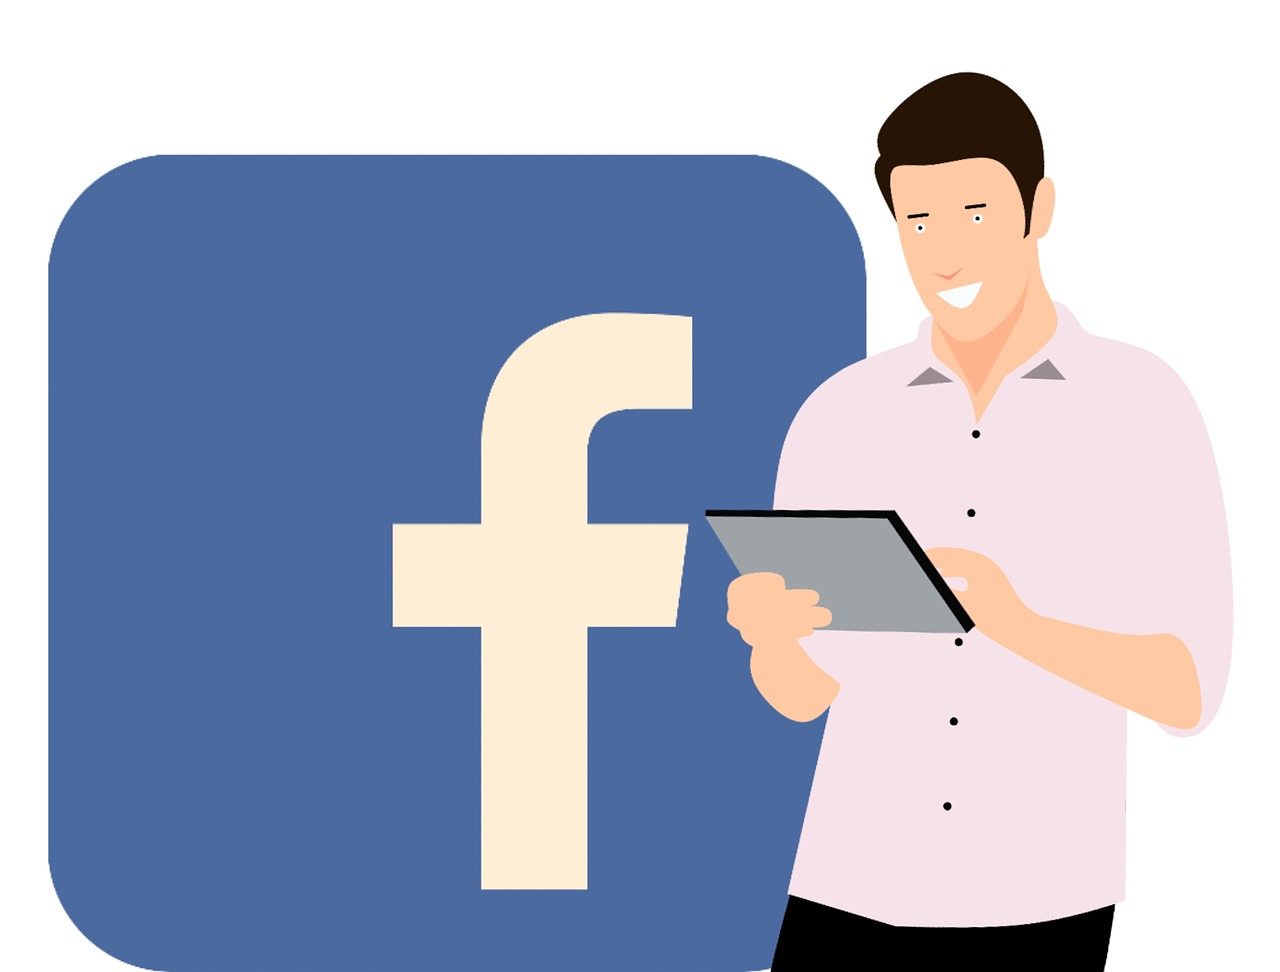 Man smiling while using a tablet with the facebook logo in the background